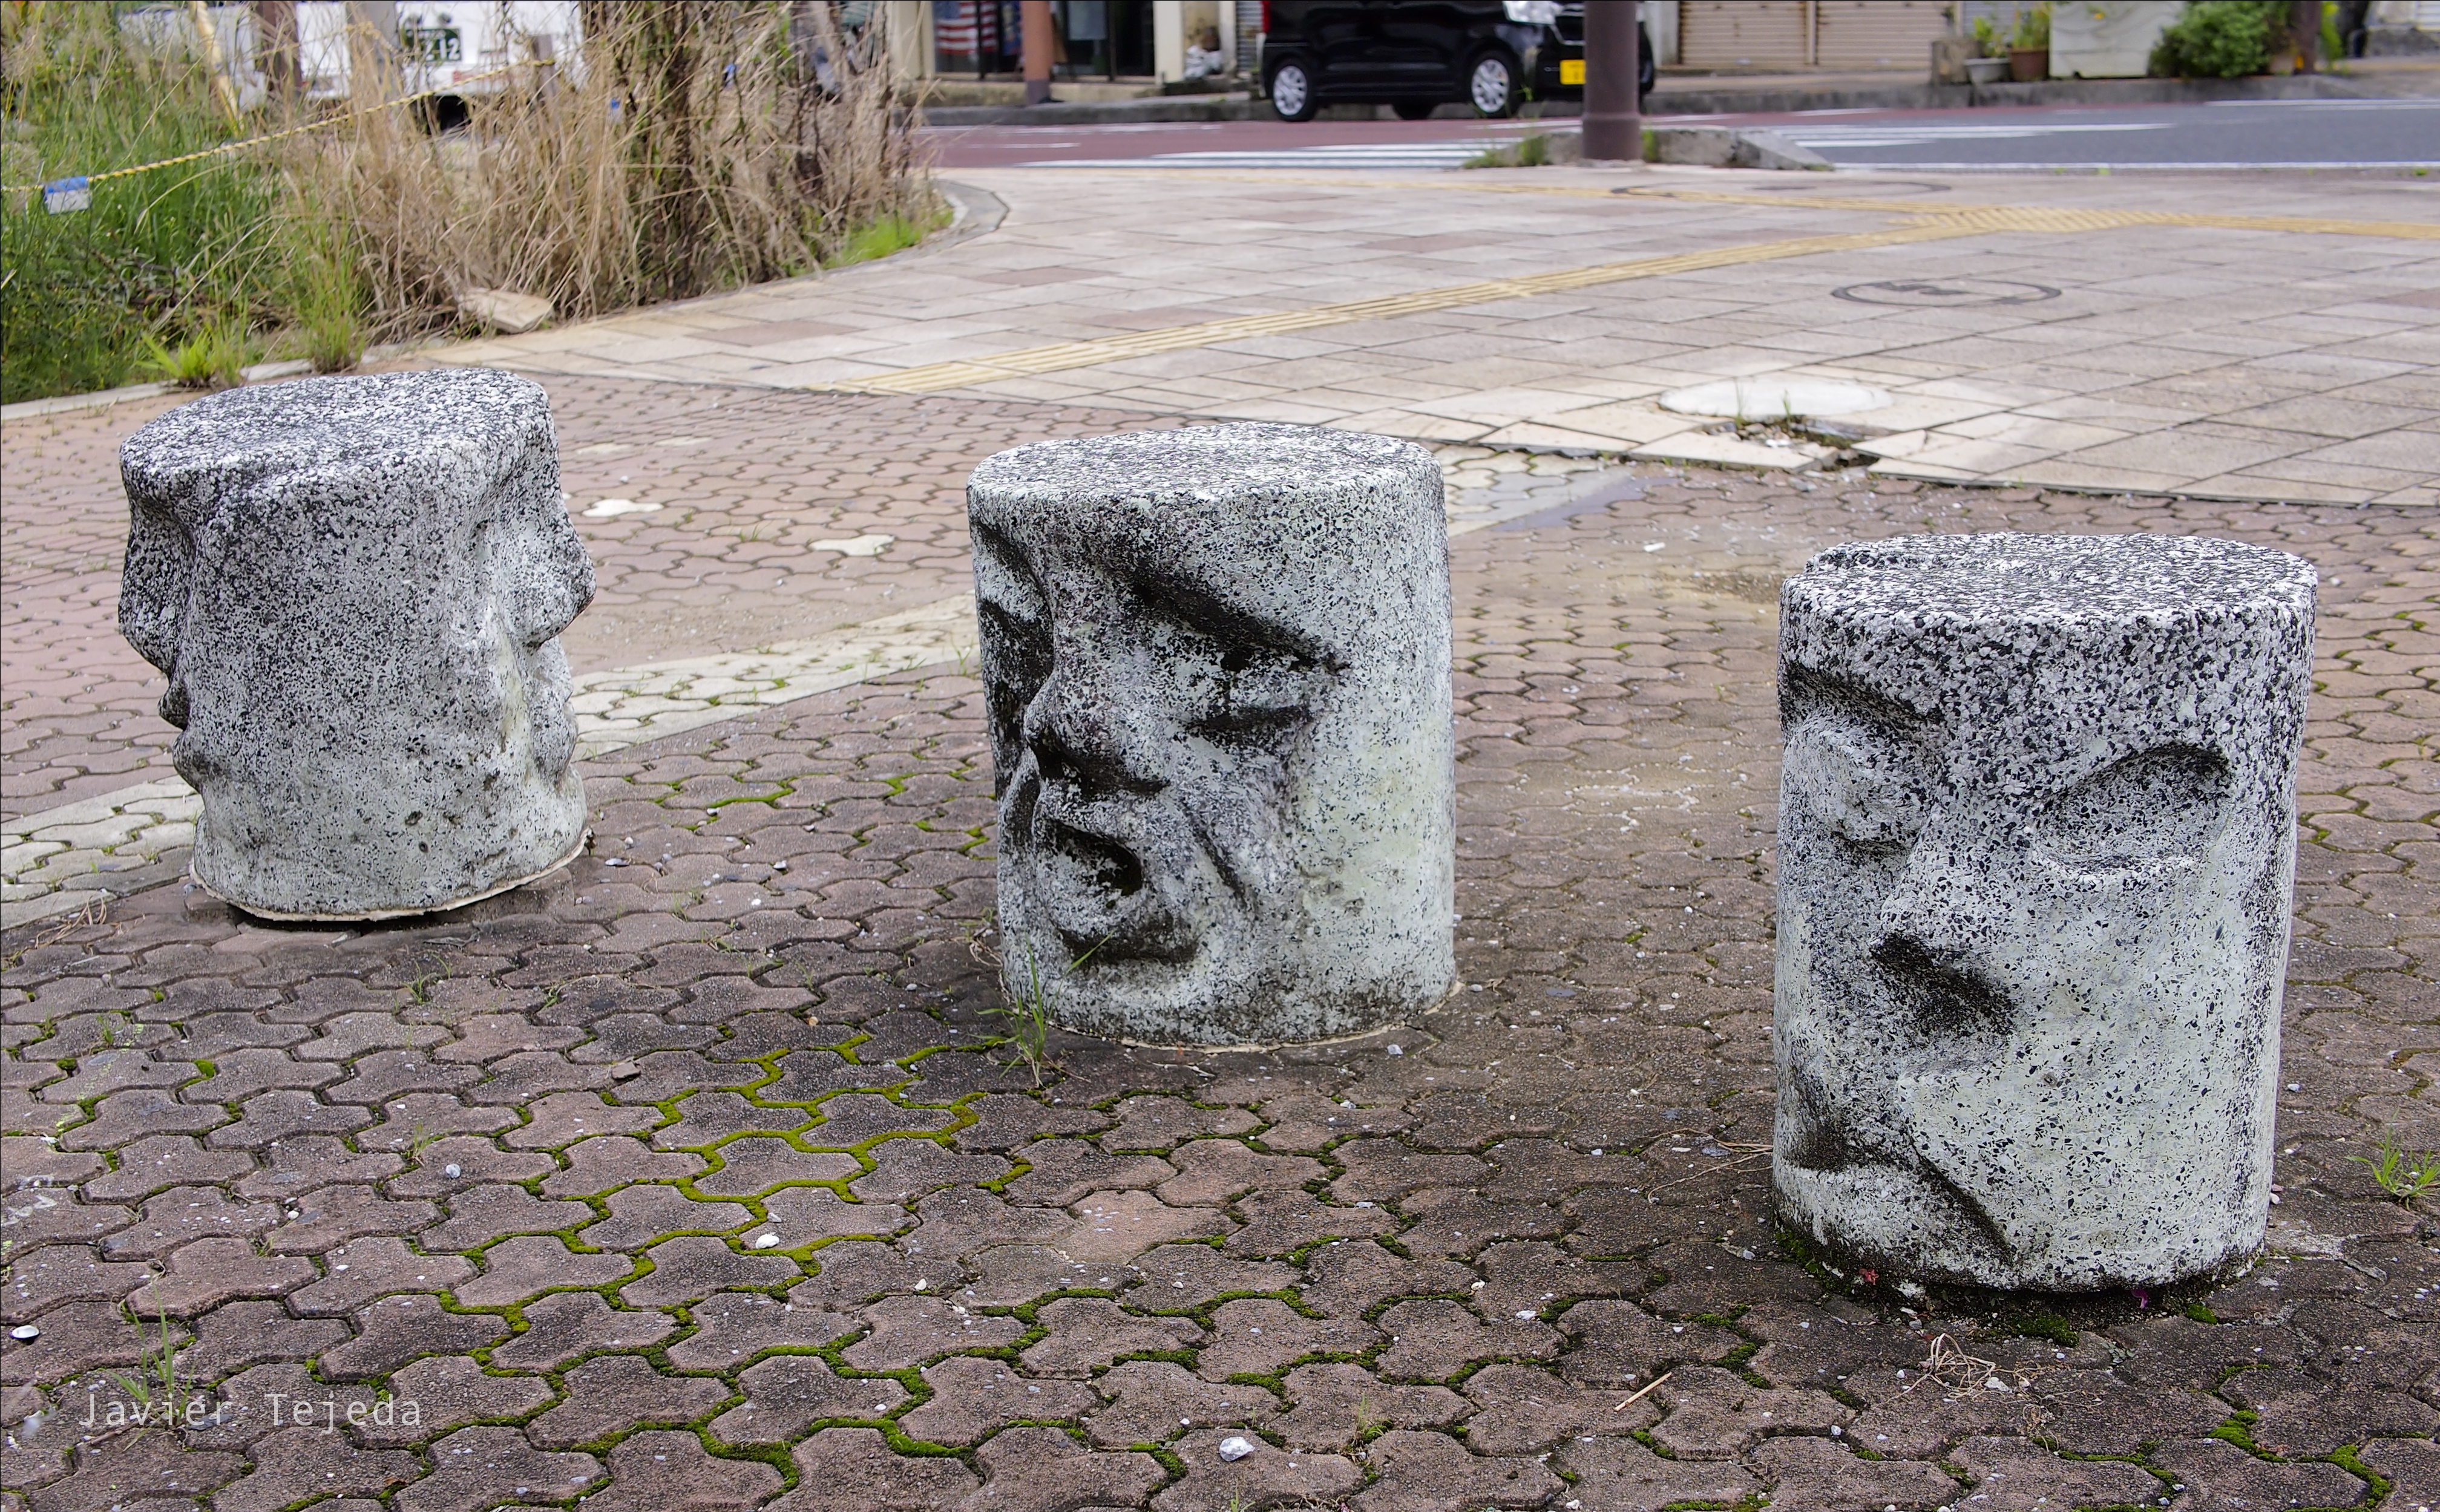 General 4032x2499 Okinawa stones face lion